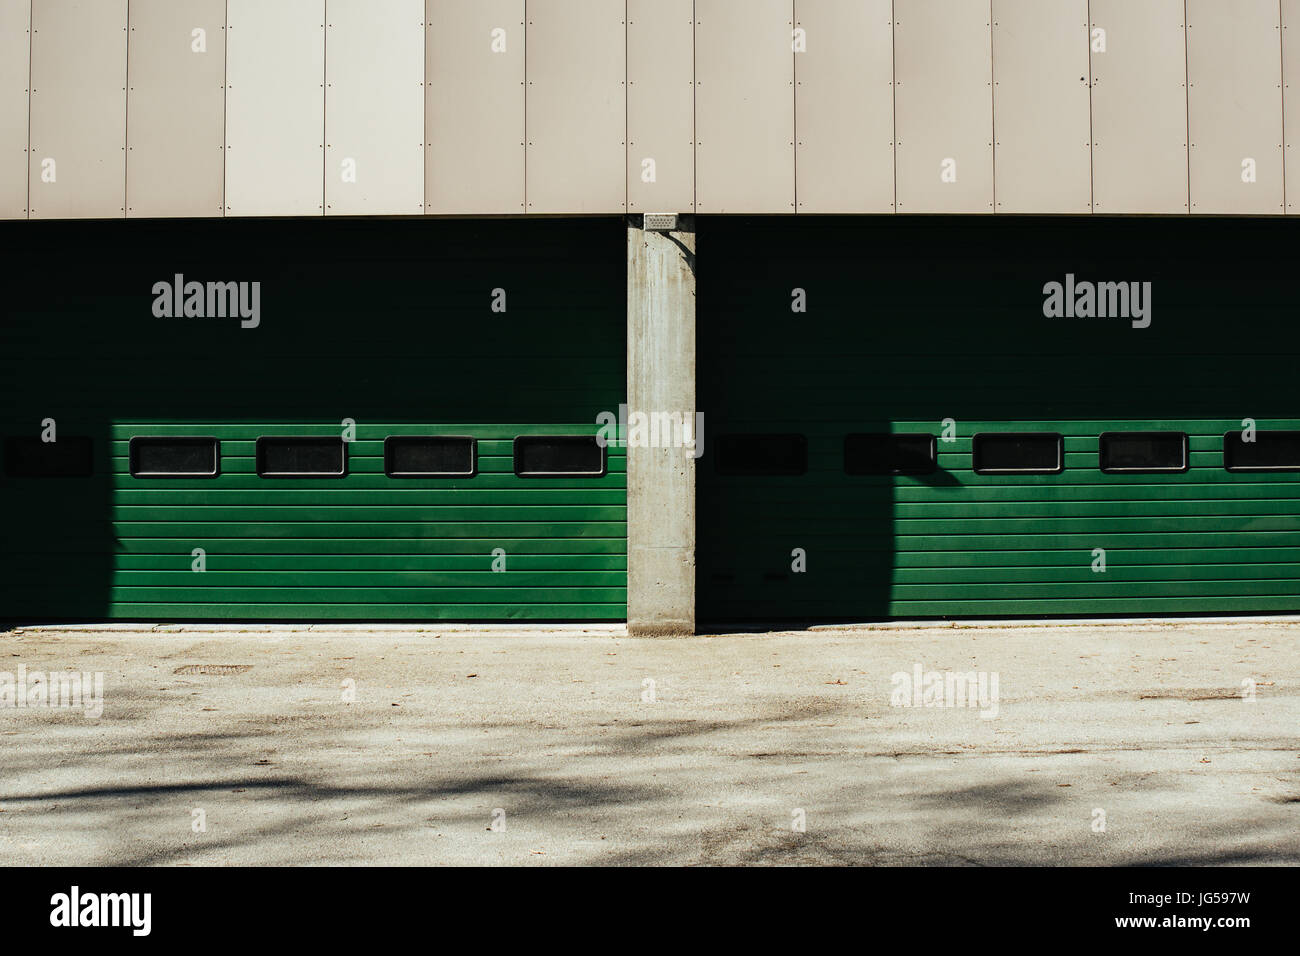 Two large green garage doors in an industrial setting. Stock Photo